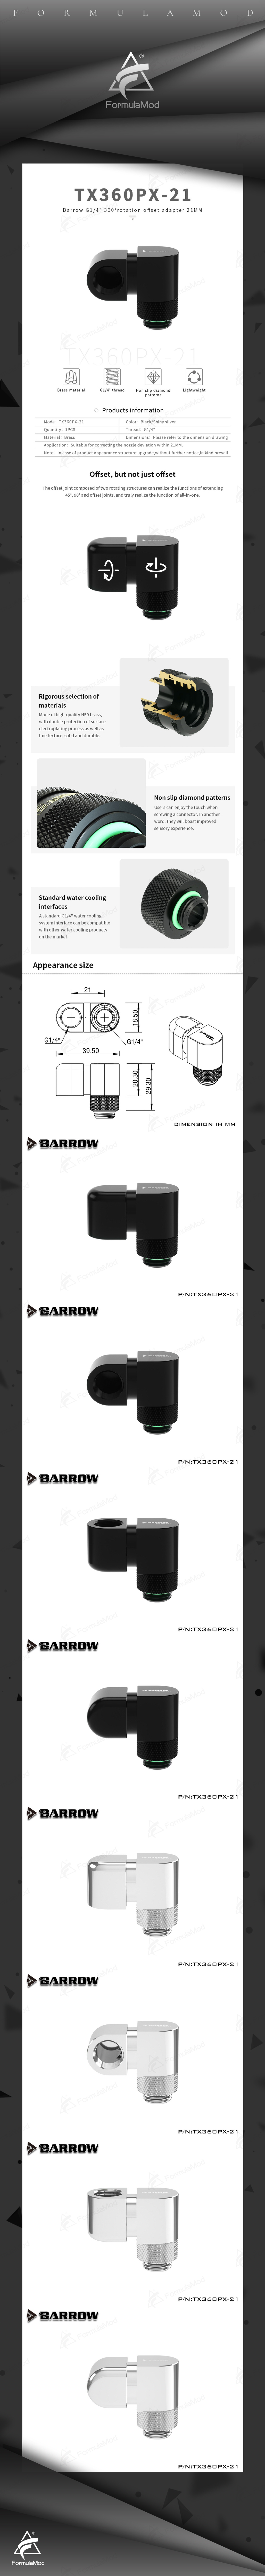 Barrow 360 Degrees Various Specifications Rotary Offset Fittings, G1/4 Thread, Different Materials Male To Female Extender Fittings, TX360PZ  